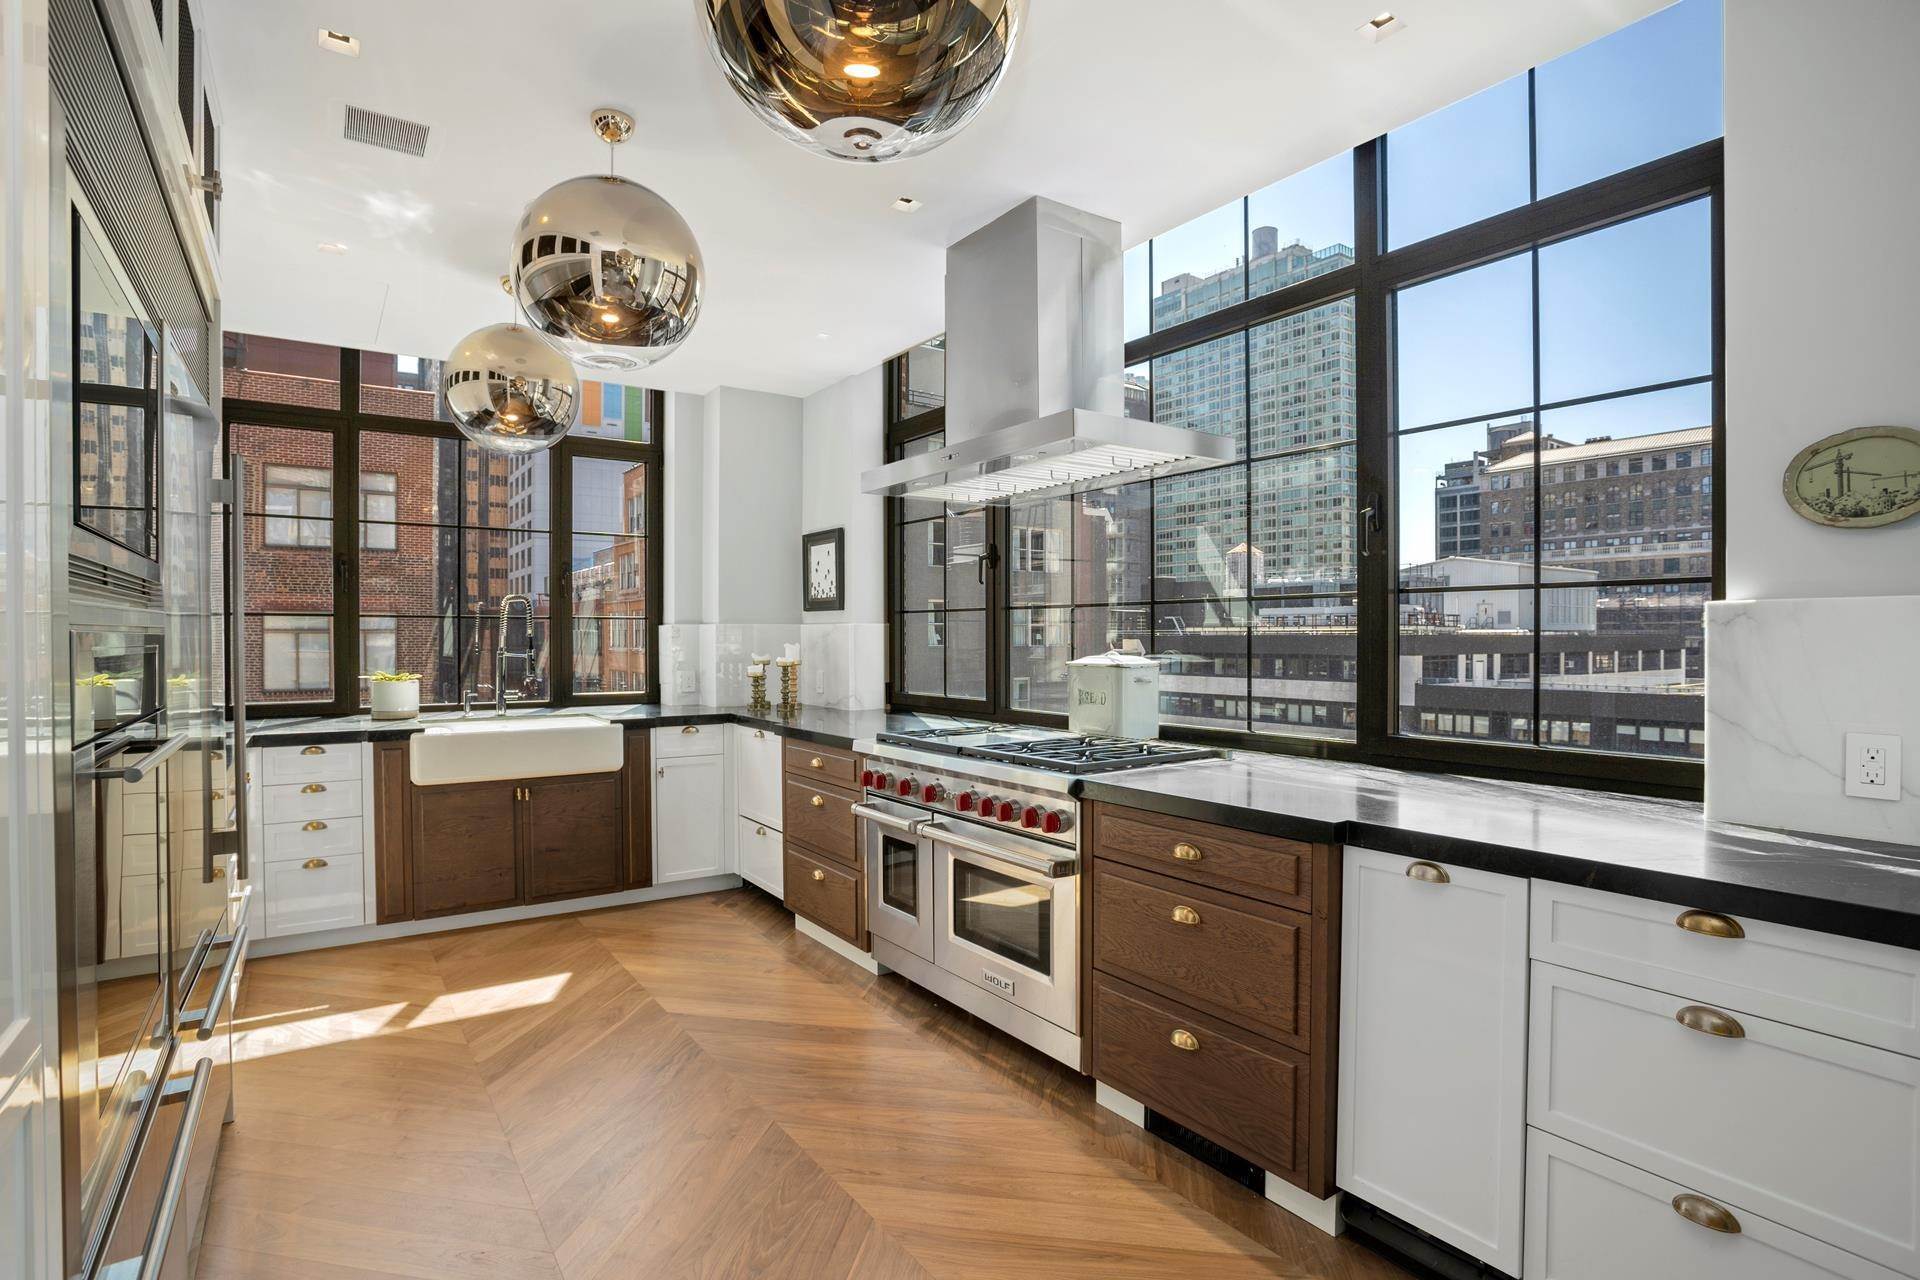 Cooperative for Sale at Hudson Yards, Manhattan, NY 10018